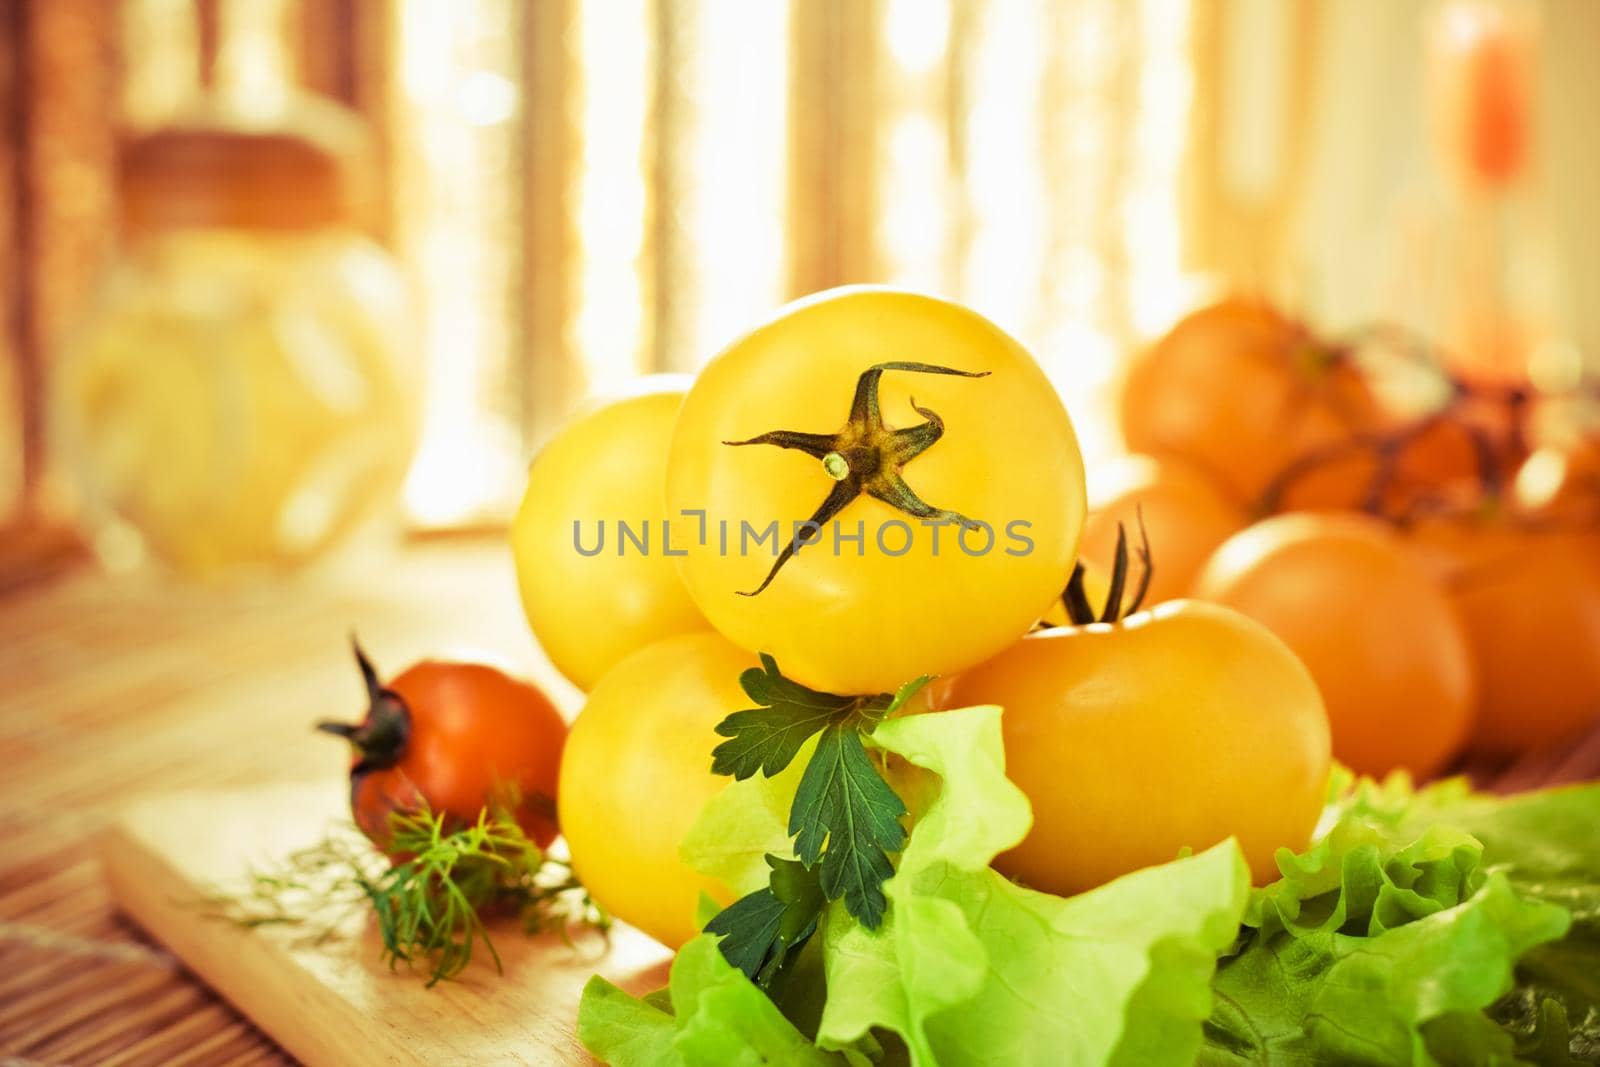 ripe tomatoes - organic vegetables and healthy eating styled concept